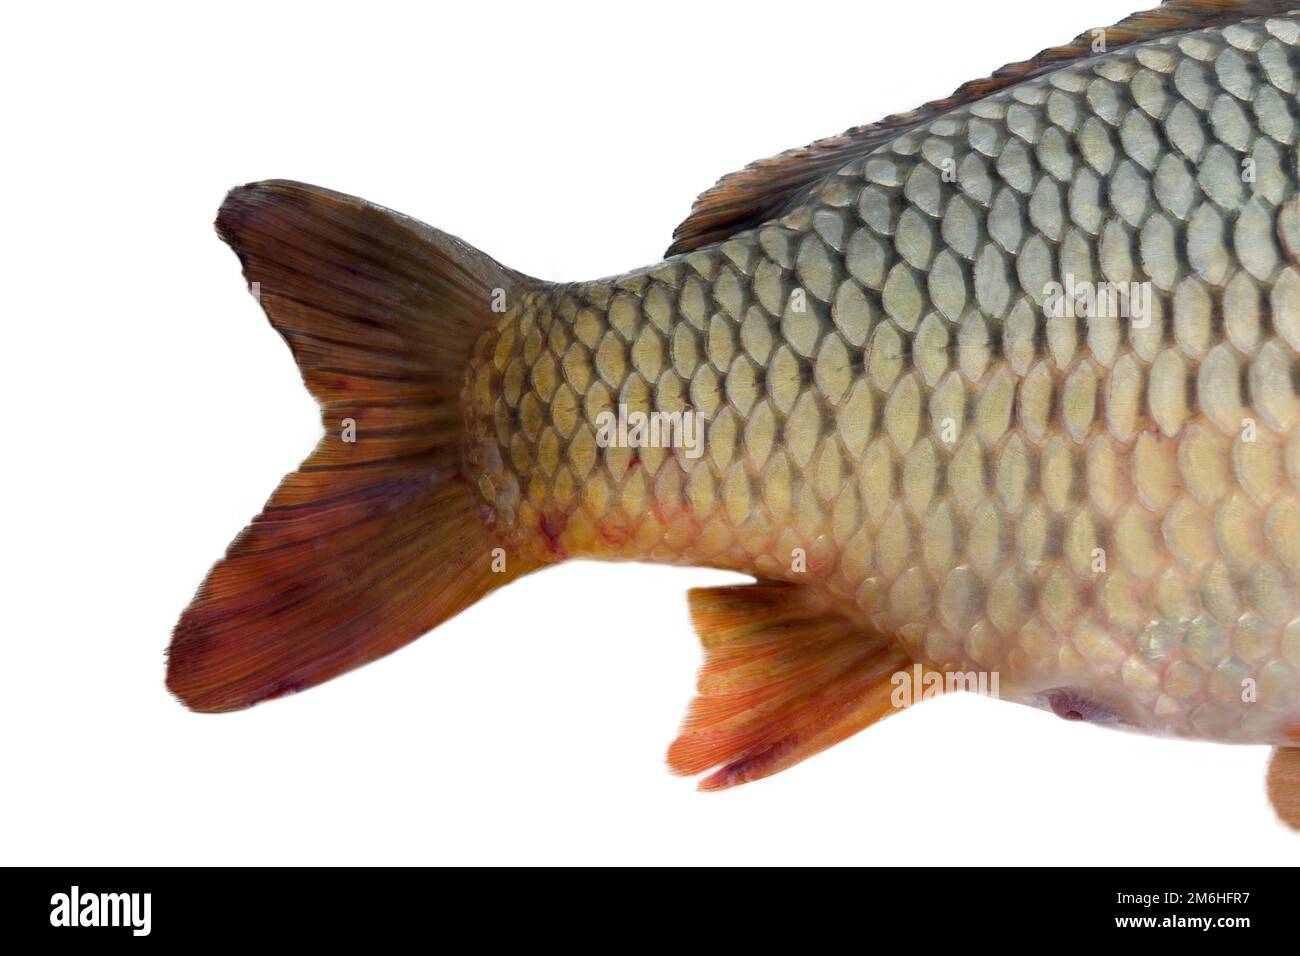 Fish tail and fins Stock Photo - Alamy